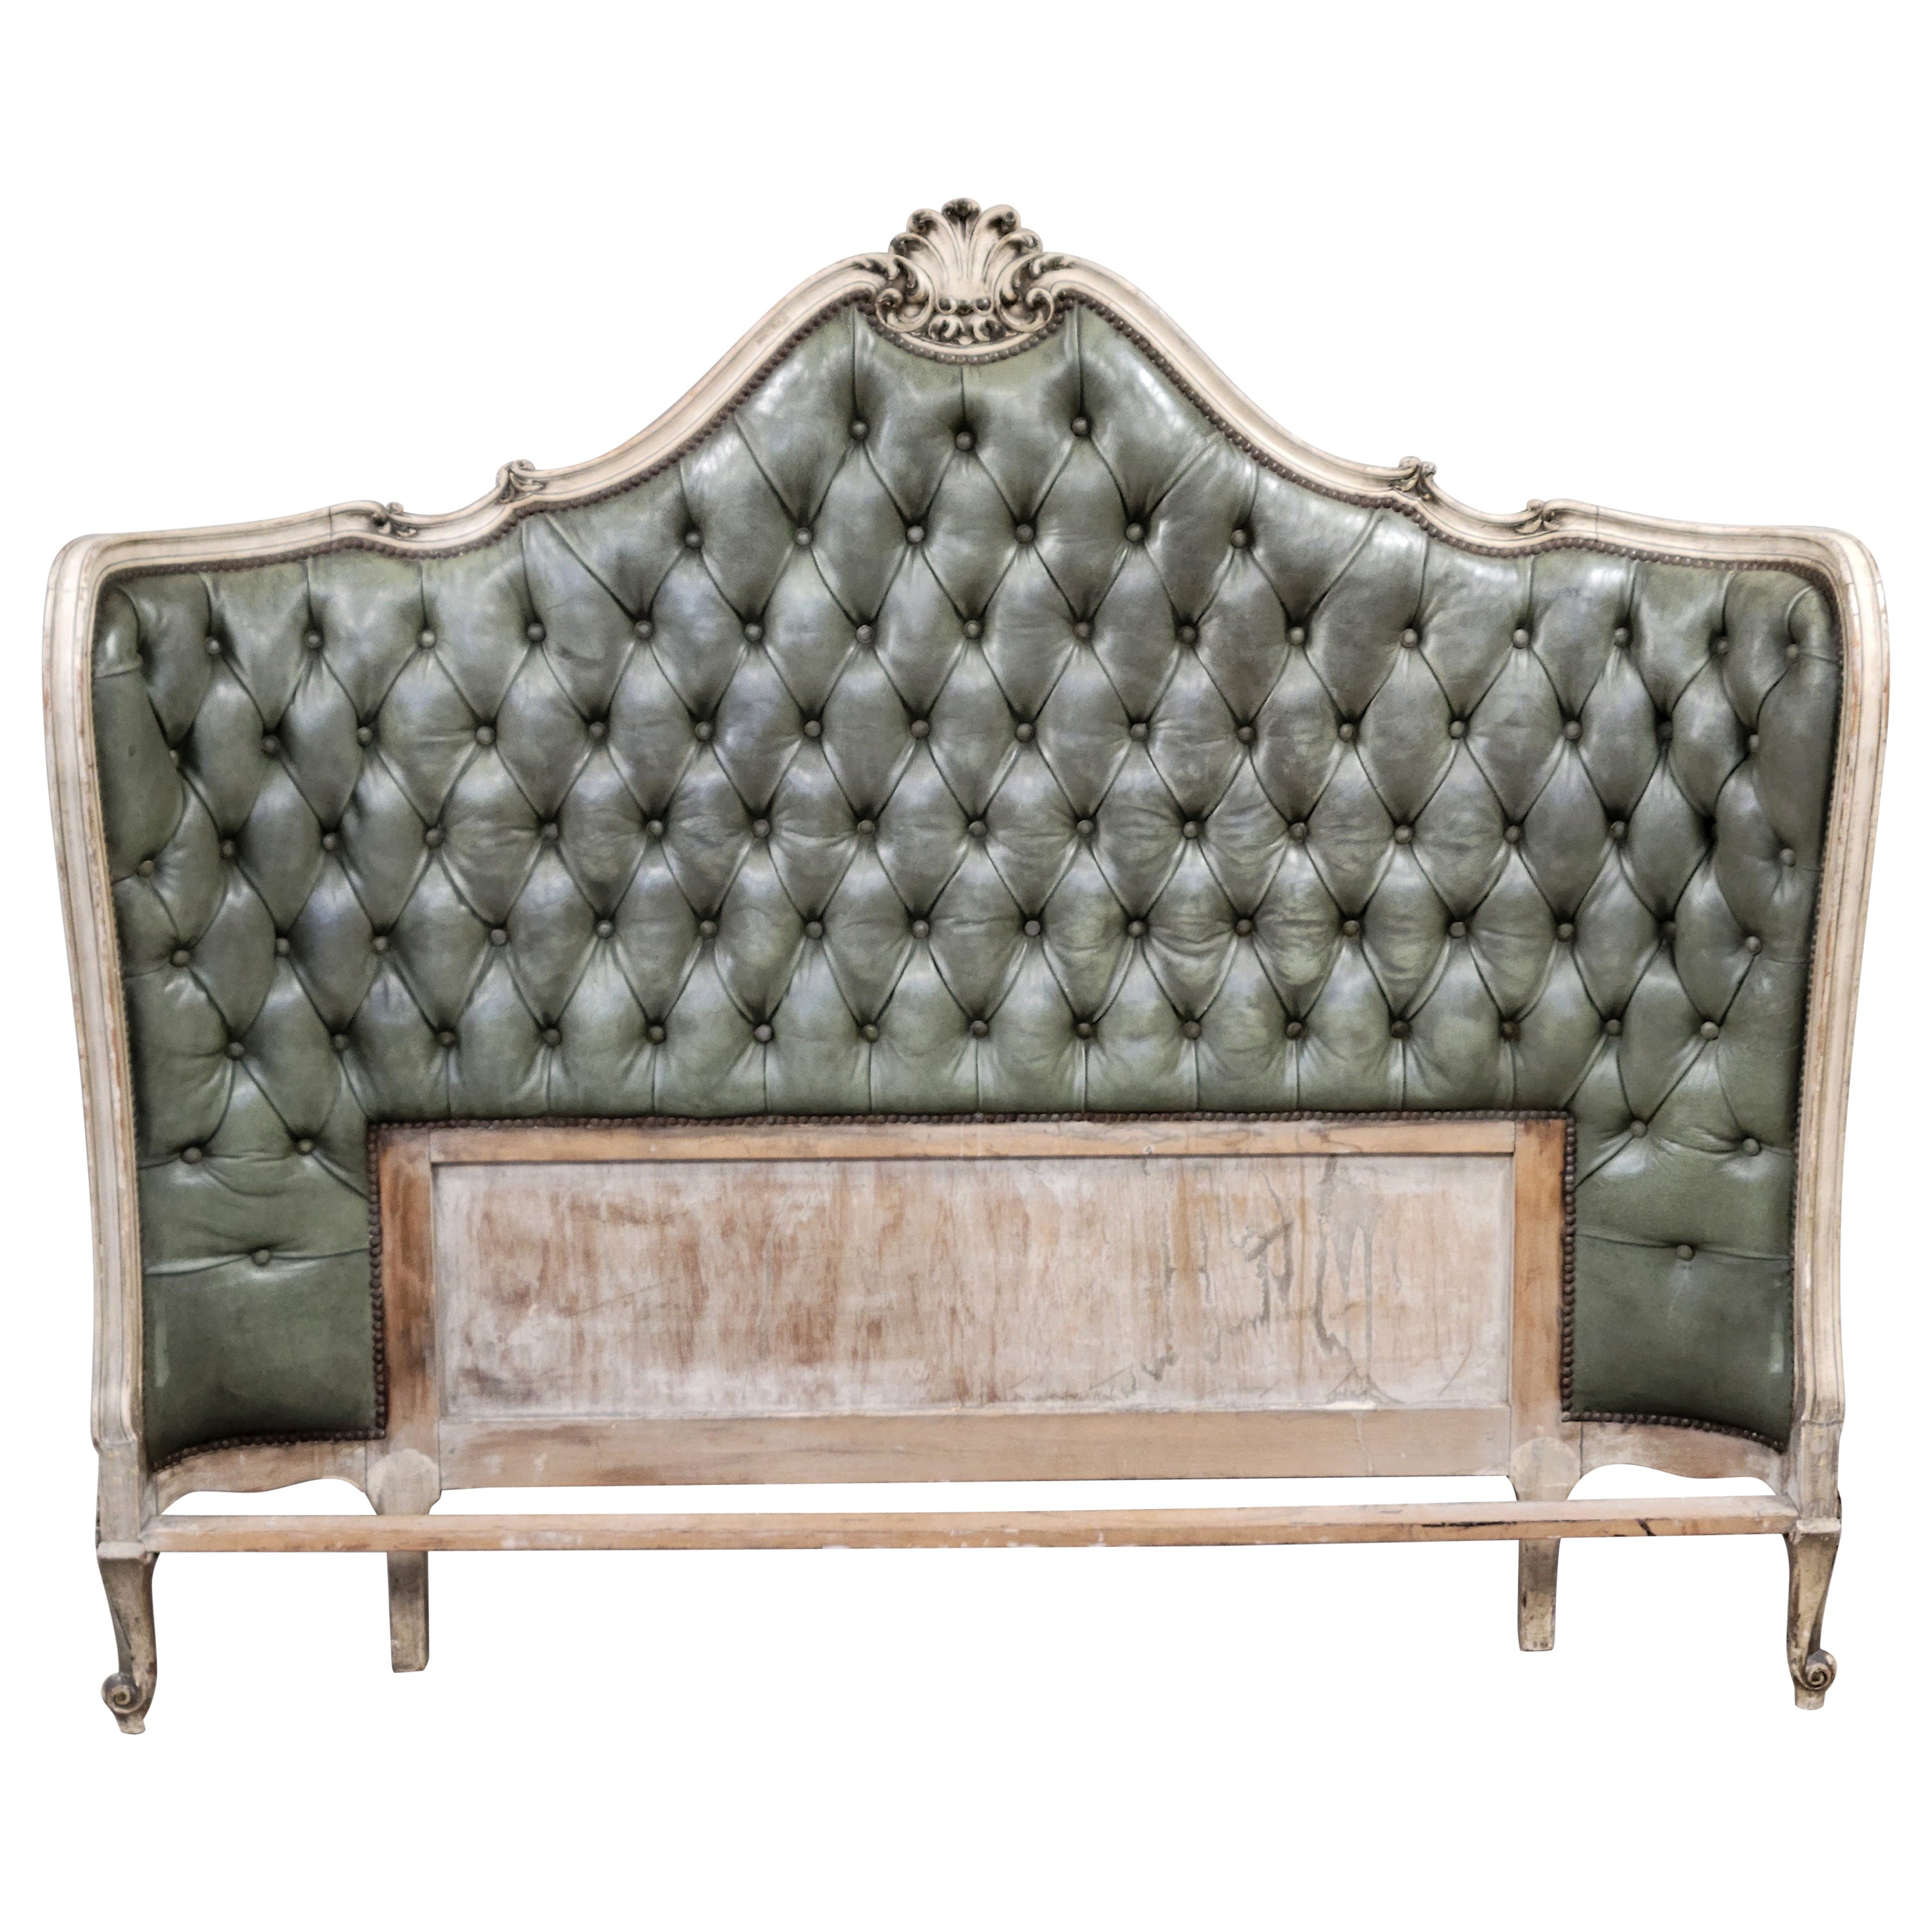 Vintage French Tufted Leather Queen or Full Size Curved Wood Frame Headboard